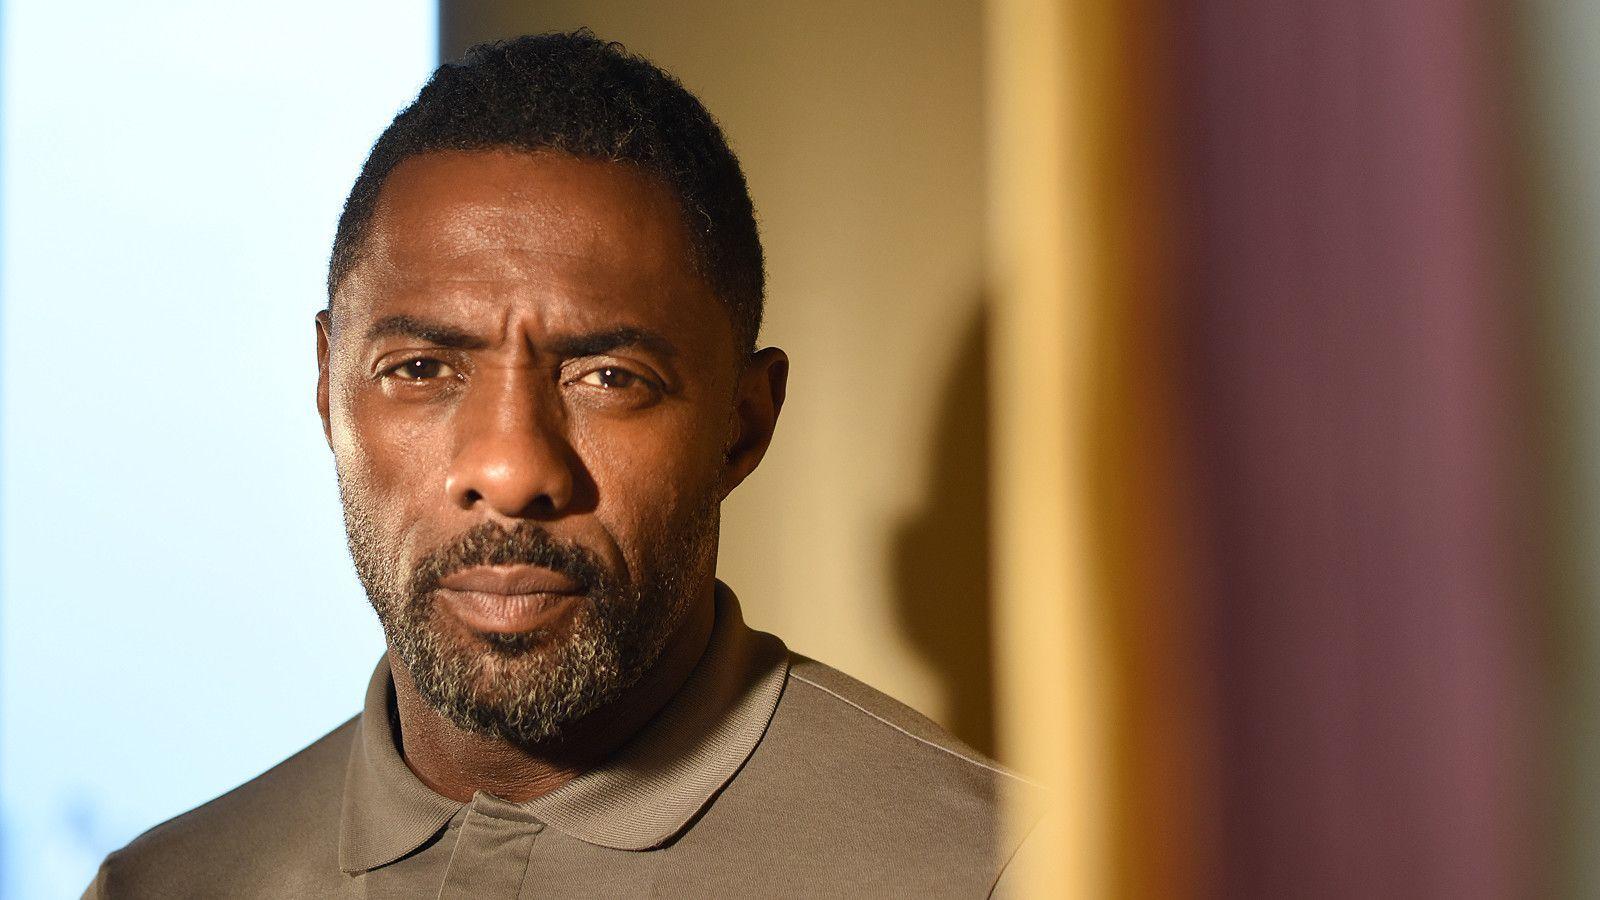 Mountain' man Idris Elba: 'My best performance is yet to come